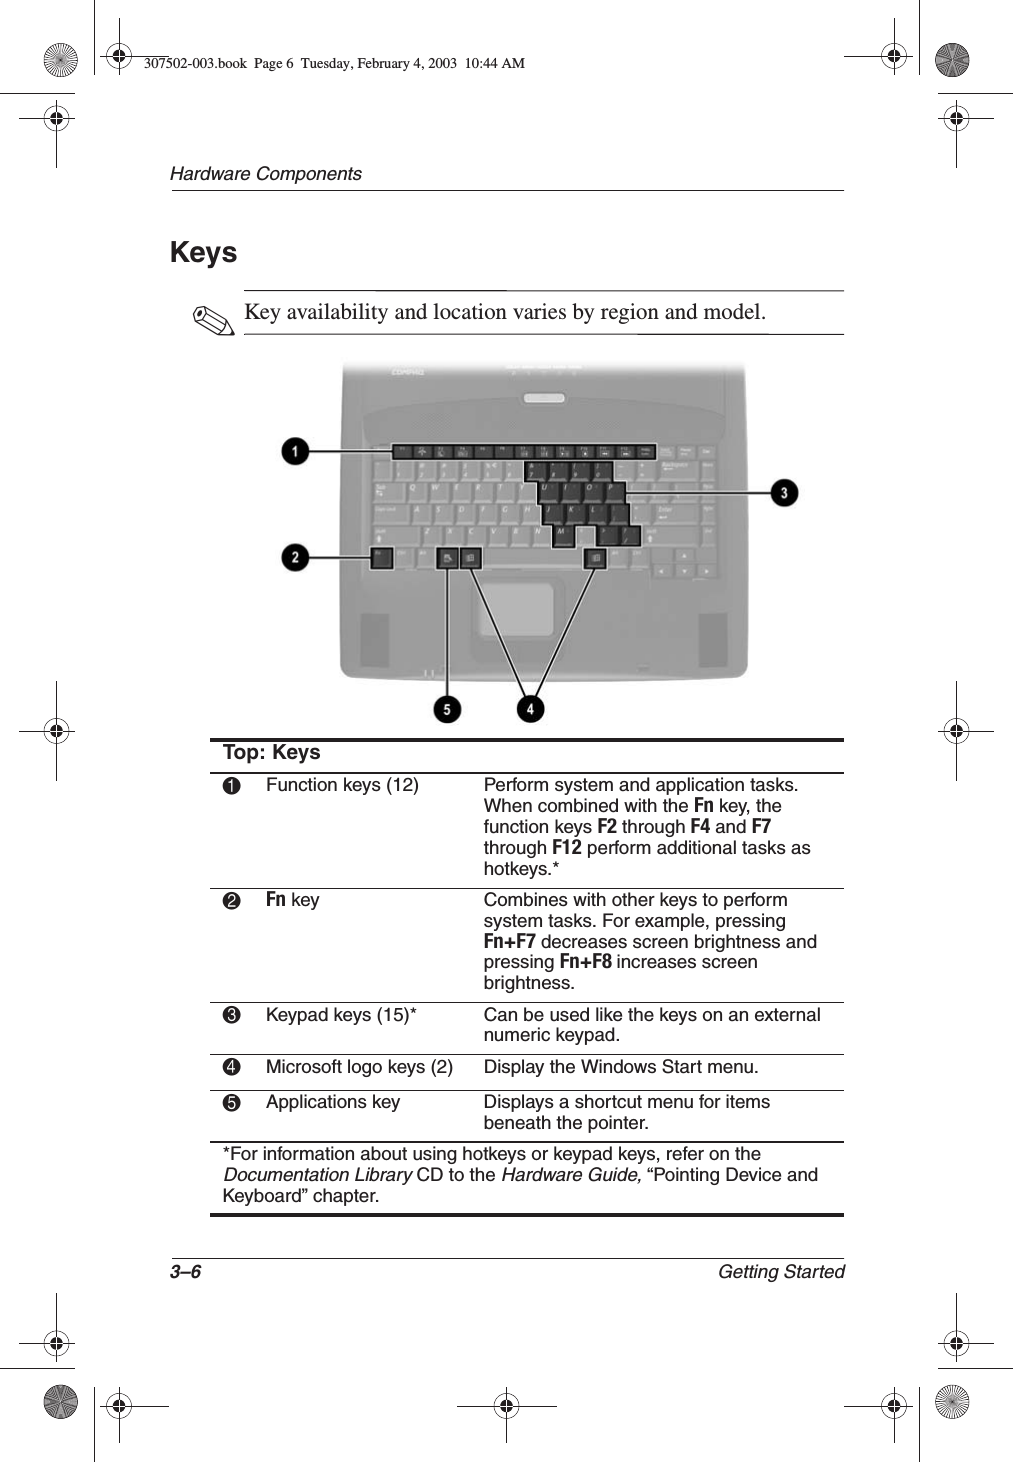 3–6 Getting StartedHardware ComponentsKeys✎Key availability and location varies by region and model.Top: Keys1Function keys (12) Perform system and application tasks. When combined with the Fn key, the function keys F2 through F4 and F7through F12 perform additional tasks as hotkeys.*2Fn key Combines with other keys to perform system tasks. For example, pressing Fn+F7 decreases screen brightness and pressing Fn+F8 increases screen brightness.3Keypad keys (15)* Can be used like the keys on an external numeric keypad.4Microsoft logo keys (2) Display the Windows Start menu.5Applications key Displays a shortcut menu for items beneath the pointer.*For information about using hotkeys or keypad keys, refer on the Documentation LibraryCD to the Hardware Guide, “Pointing Device and Keyboard” chapter.307502-003.book  Page 6  Tuesday, February 4, 2003  10:44 AM